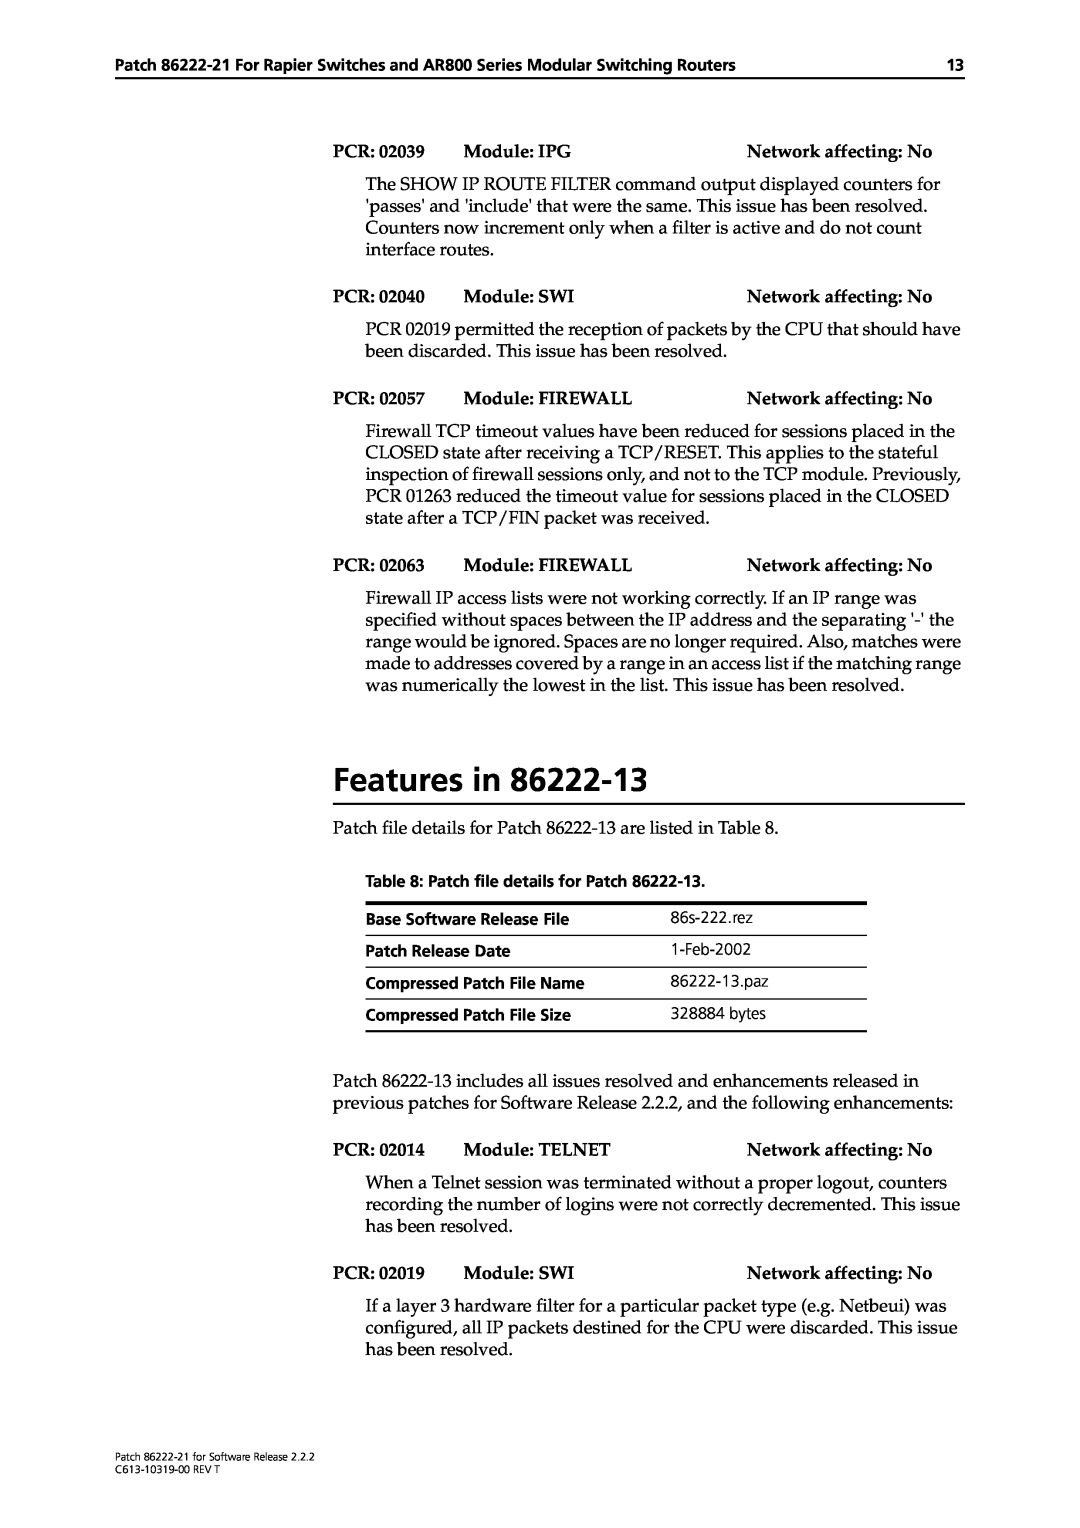 Allied Telesis 86222-21 manual Features in, Patch file details for Patch 86222-13 are listed in Table 